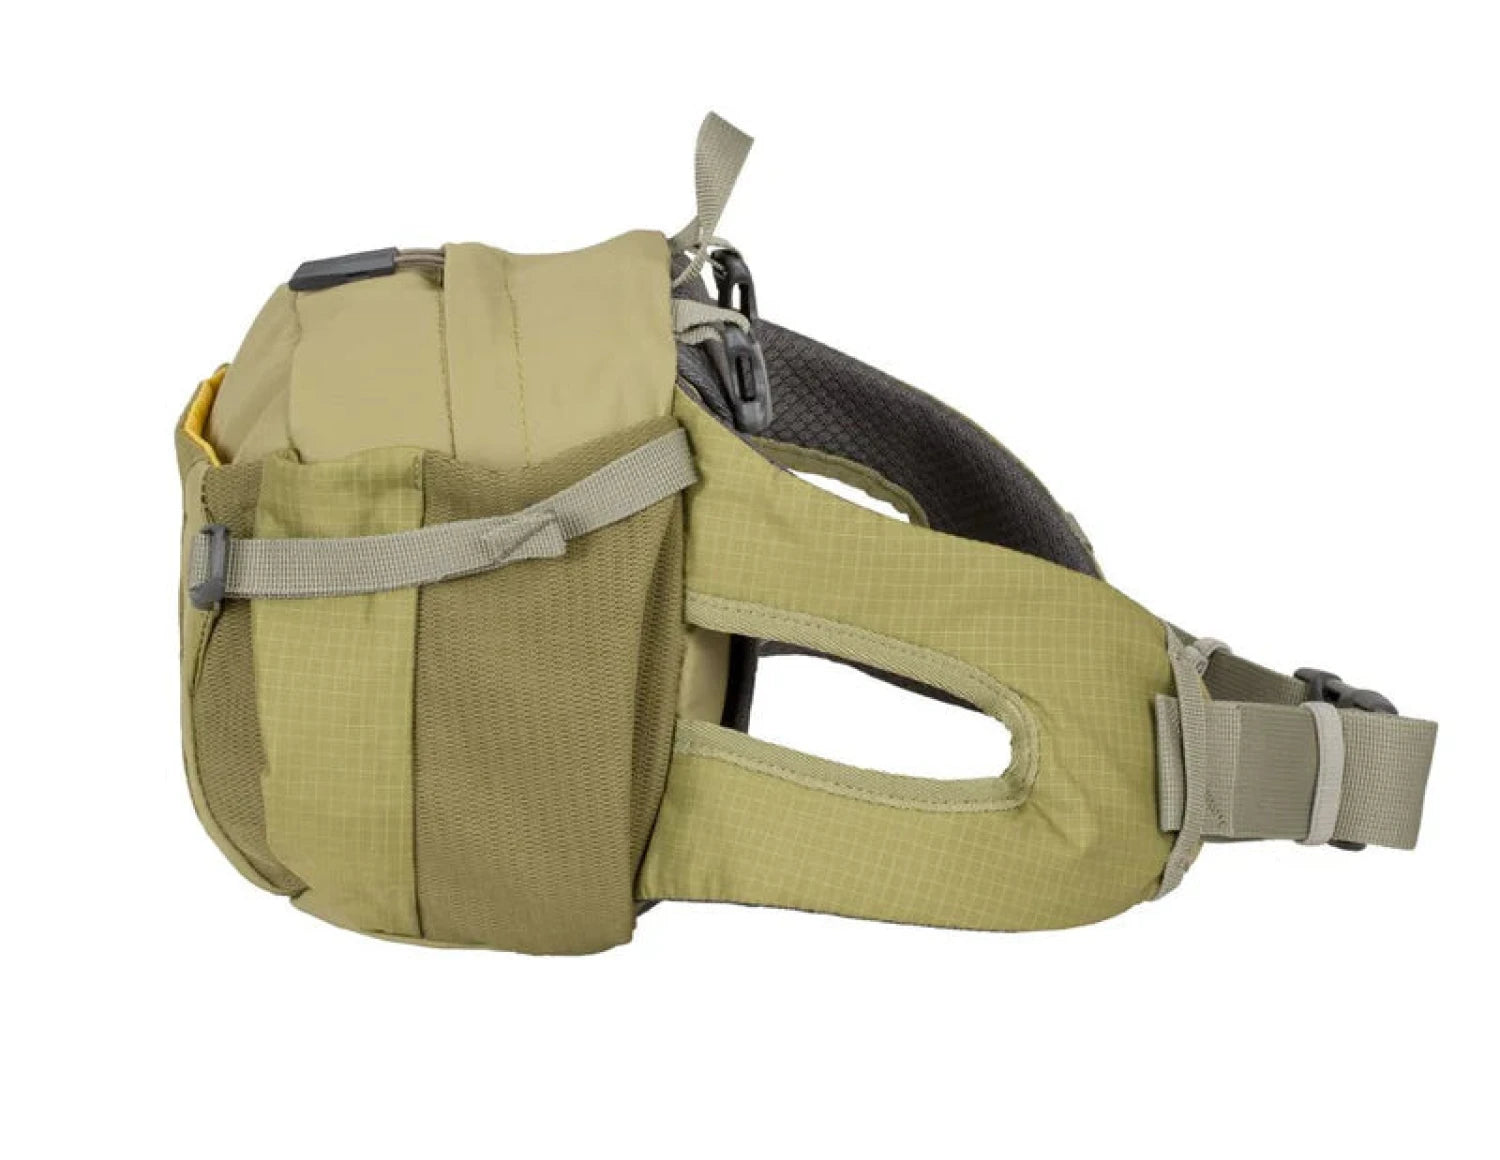 Mountainsmith 2023 Drift Lumbar Pack shown in the Olive Green color option.  Side view.